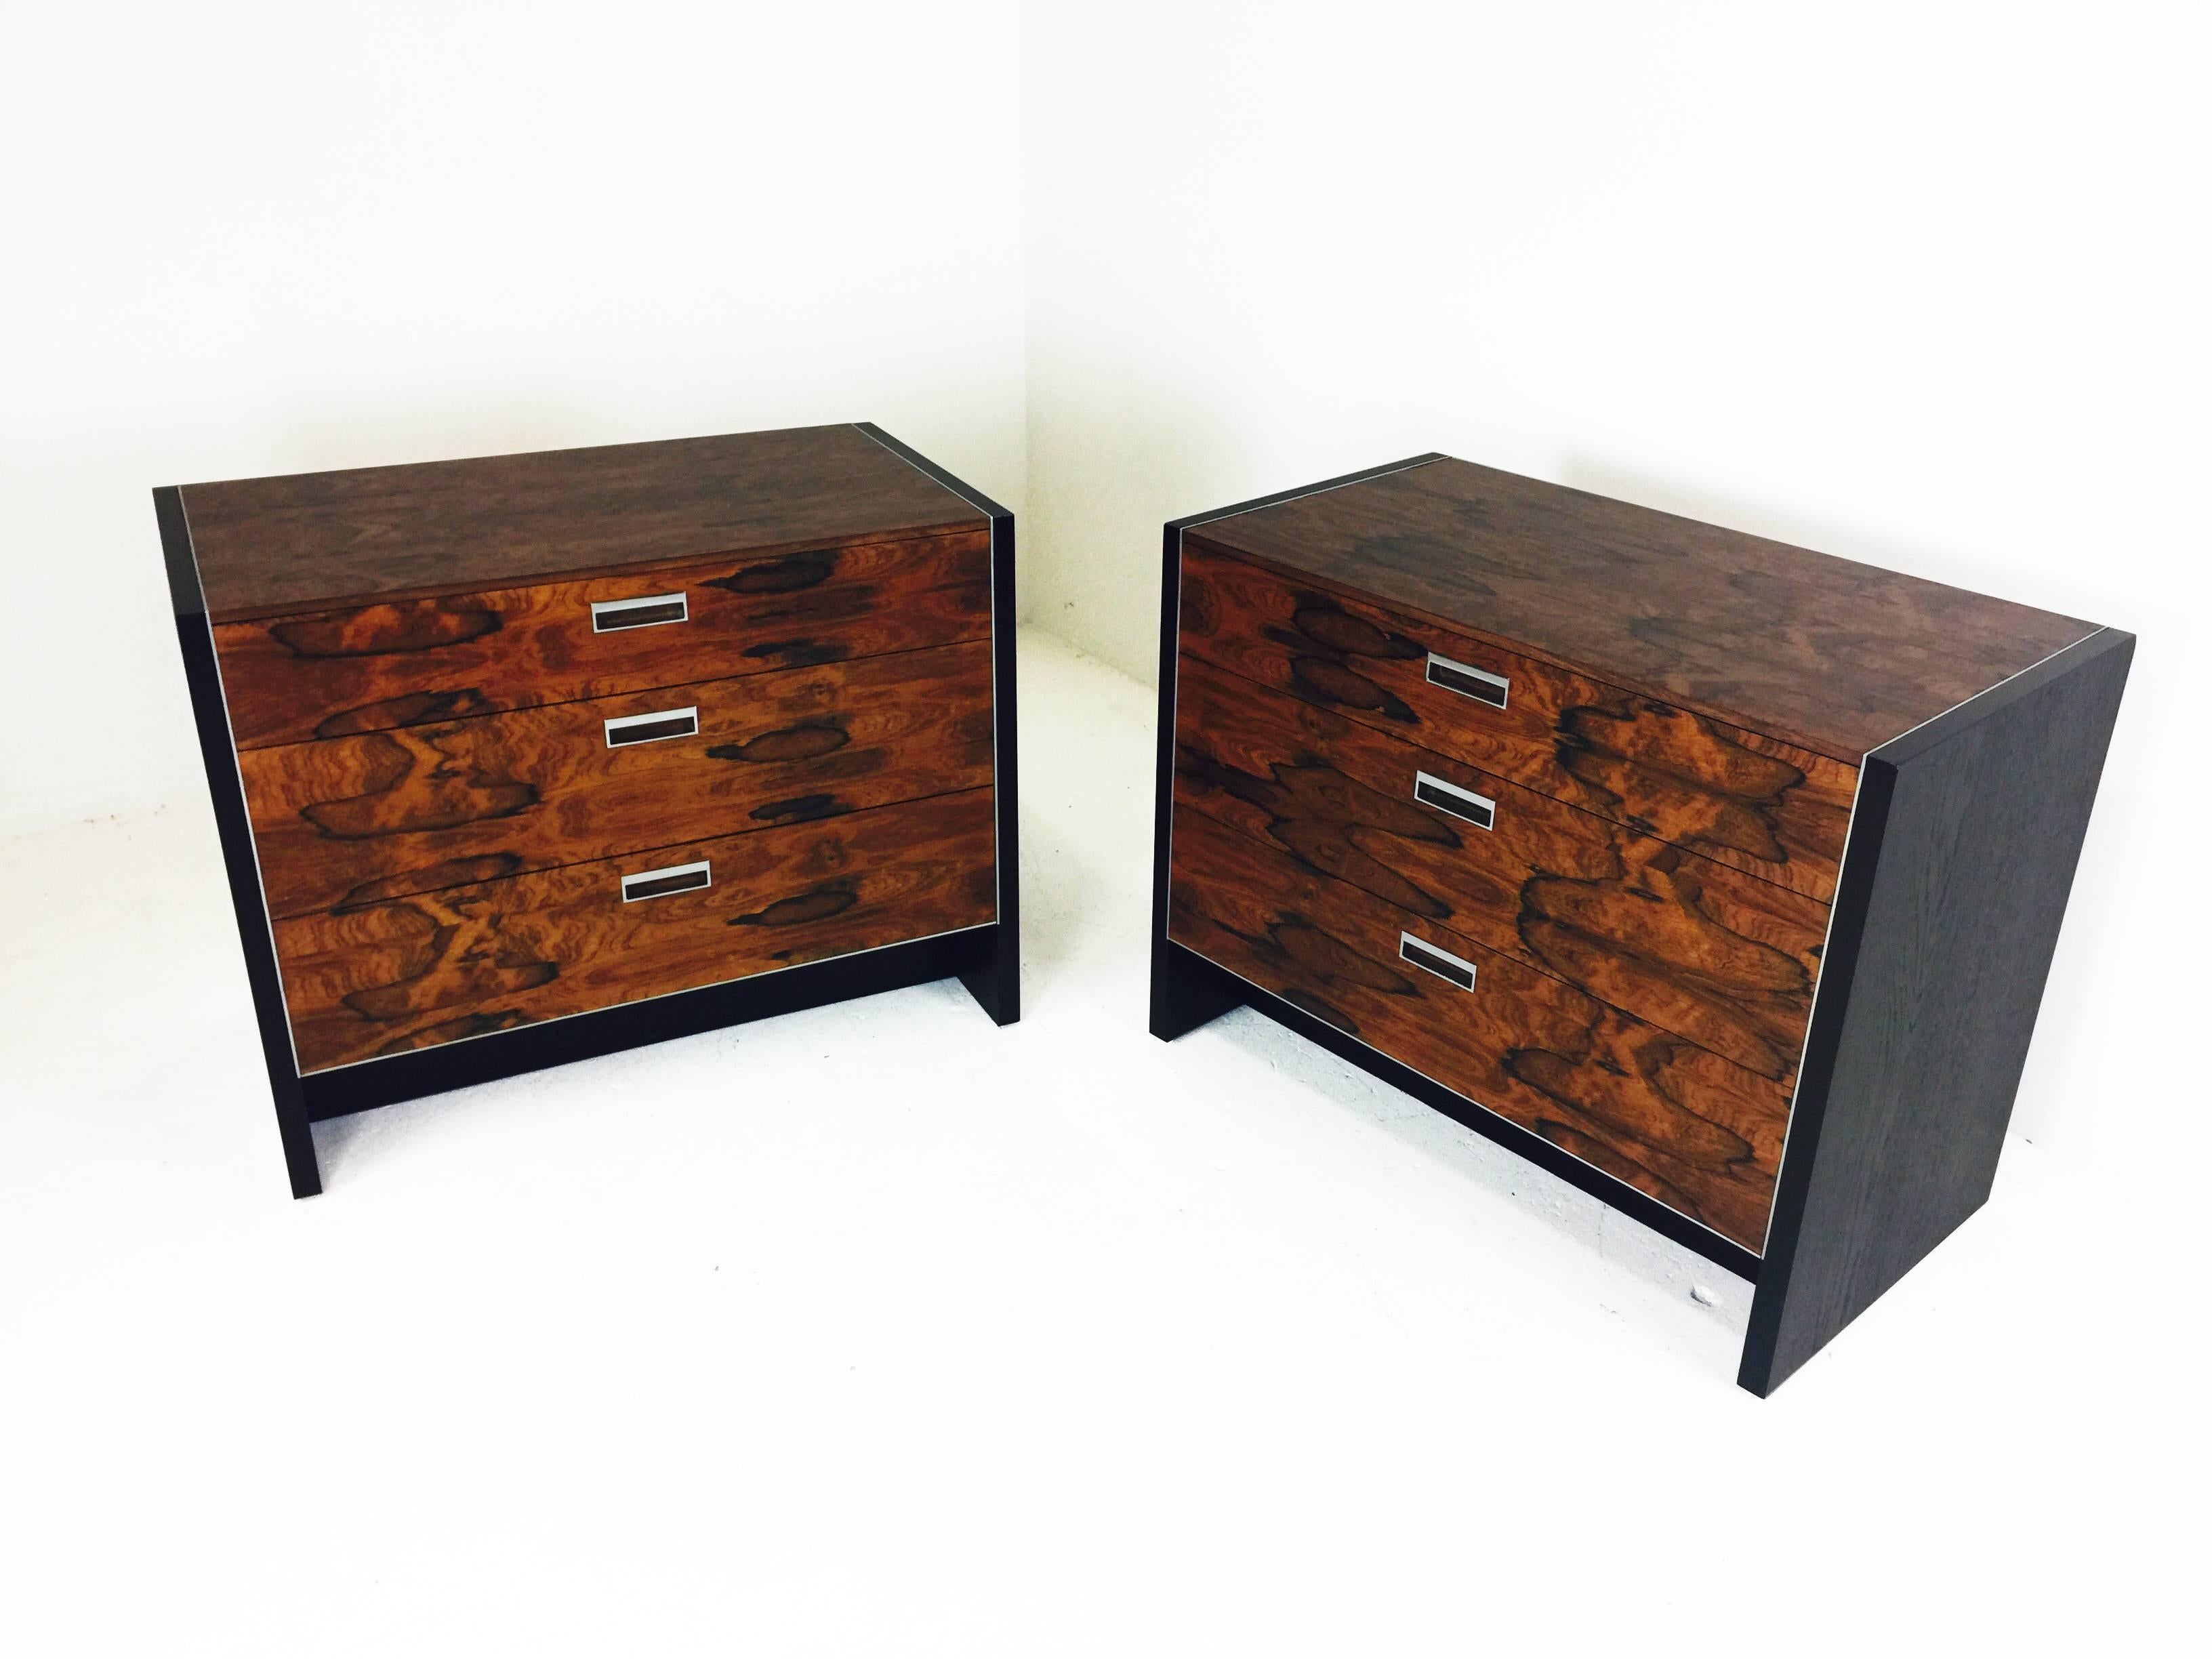 Pair of newly refinished rosewood nightstands with nickel hardware by Robert Baron for Glenn of California,
circa 1960s.

Dimensions: 36" W x 20" D x 28.5" T.
  